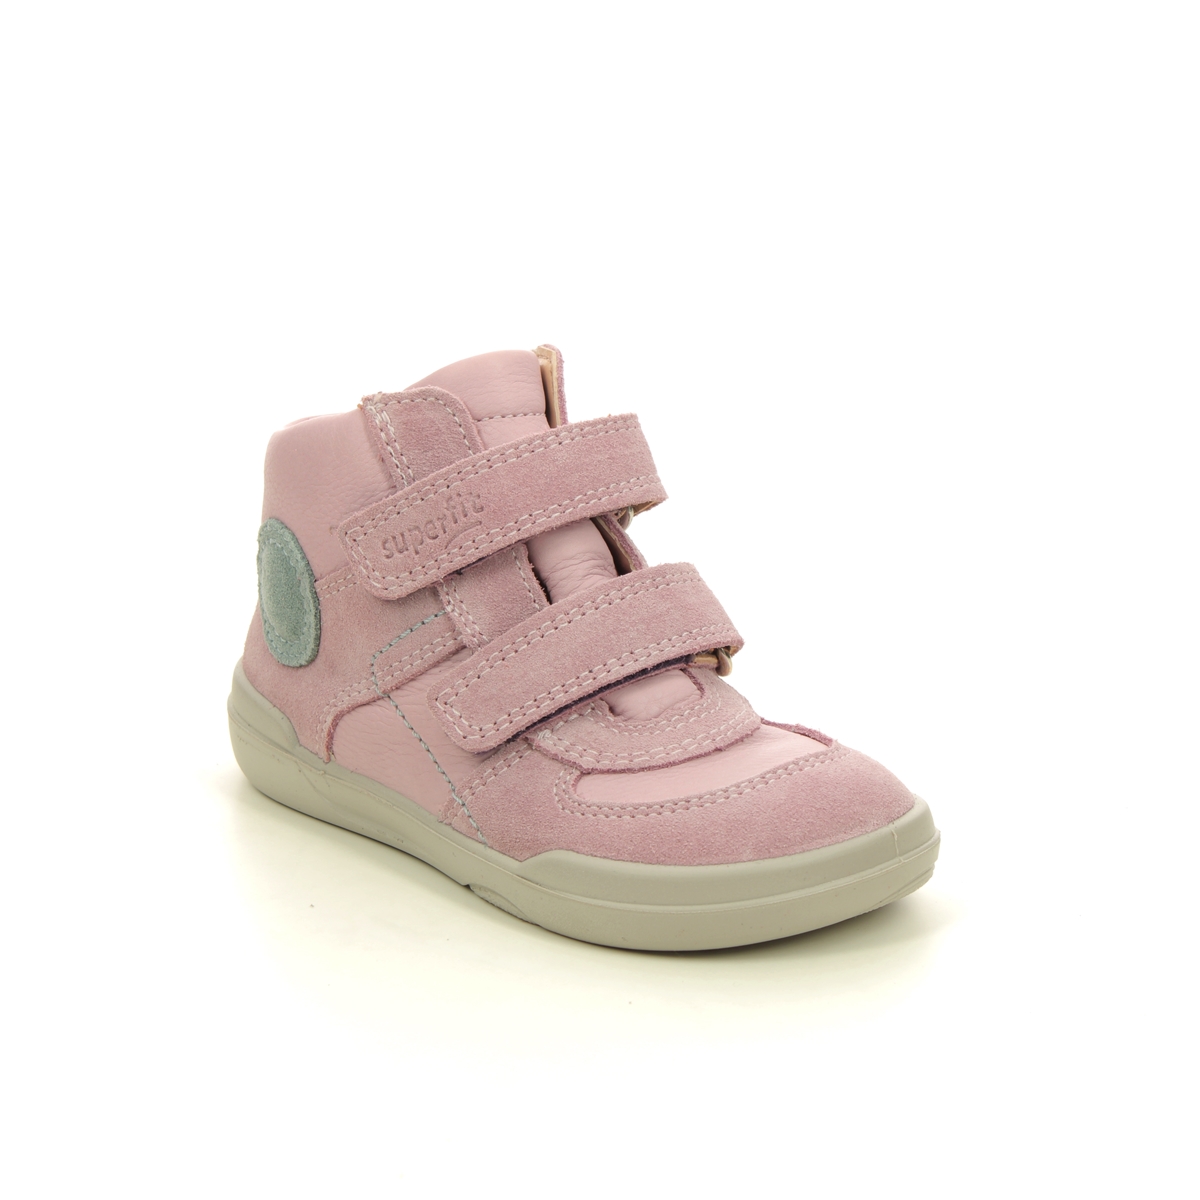 Superfit Superfree Gtx Pink Suede Kids Toddler Girls Boots 1000541-5500 In Size 20 In Plain Pink Suede